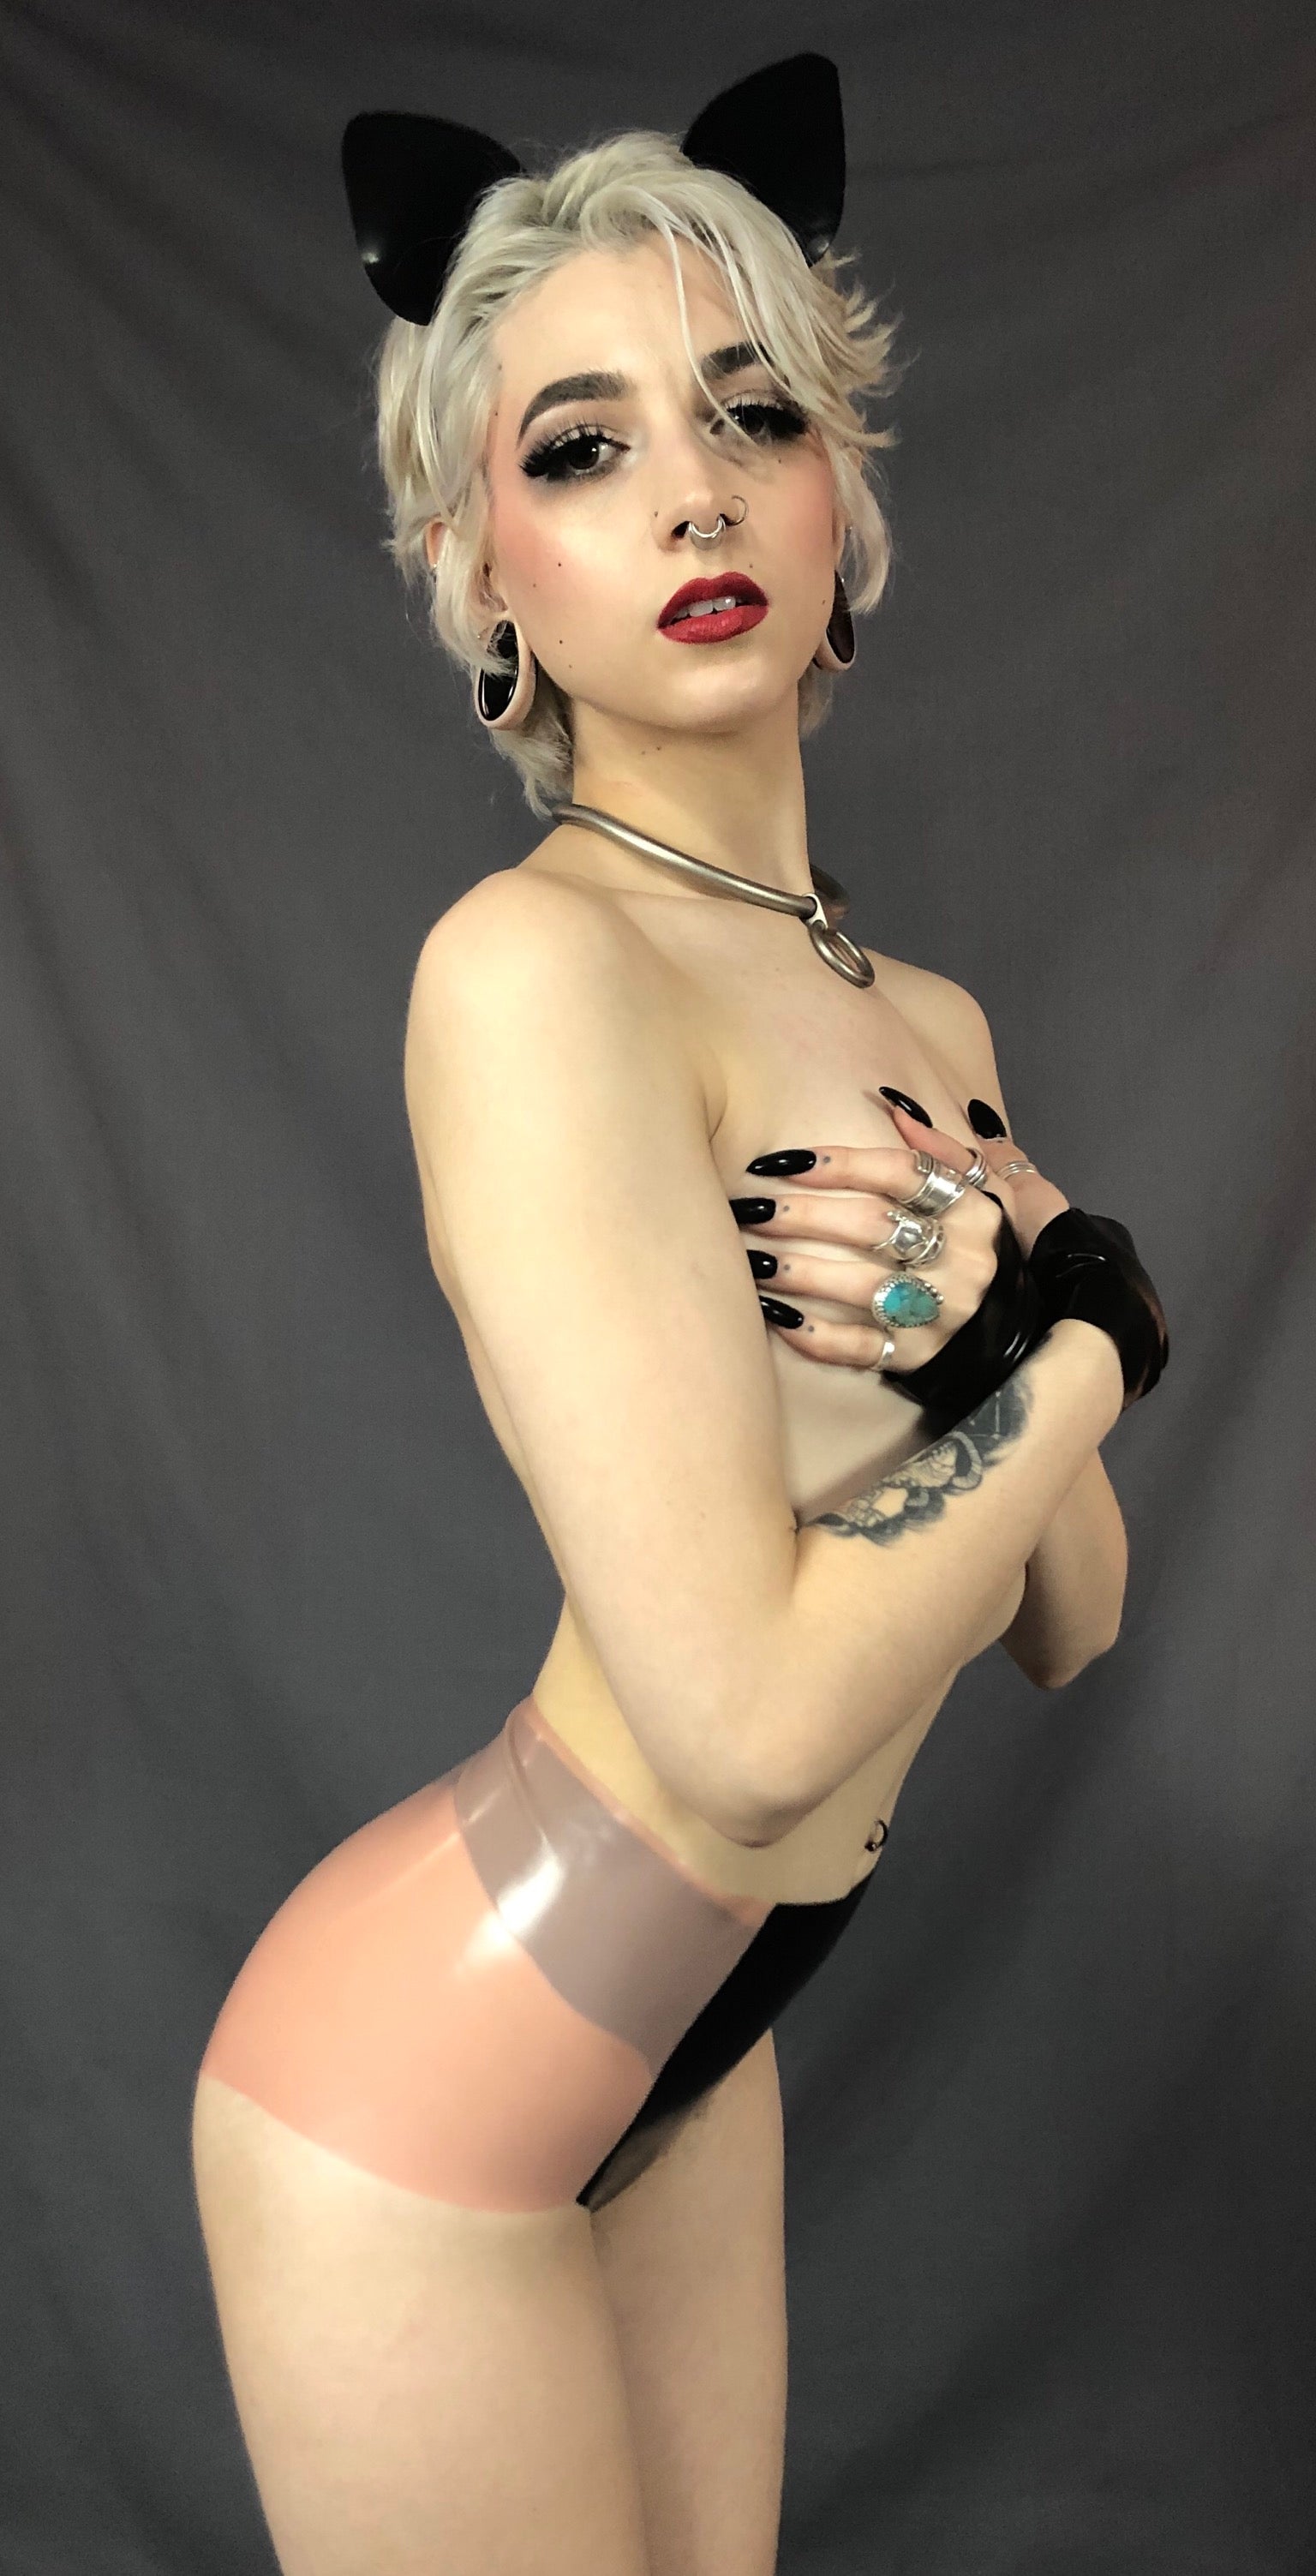 Model wearing cat ears and covering her breasts with her hands showing the side of the Classic Latex Black Panel Panty.